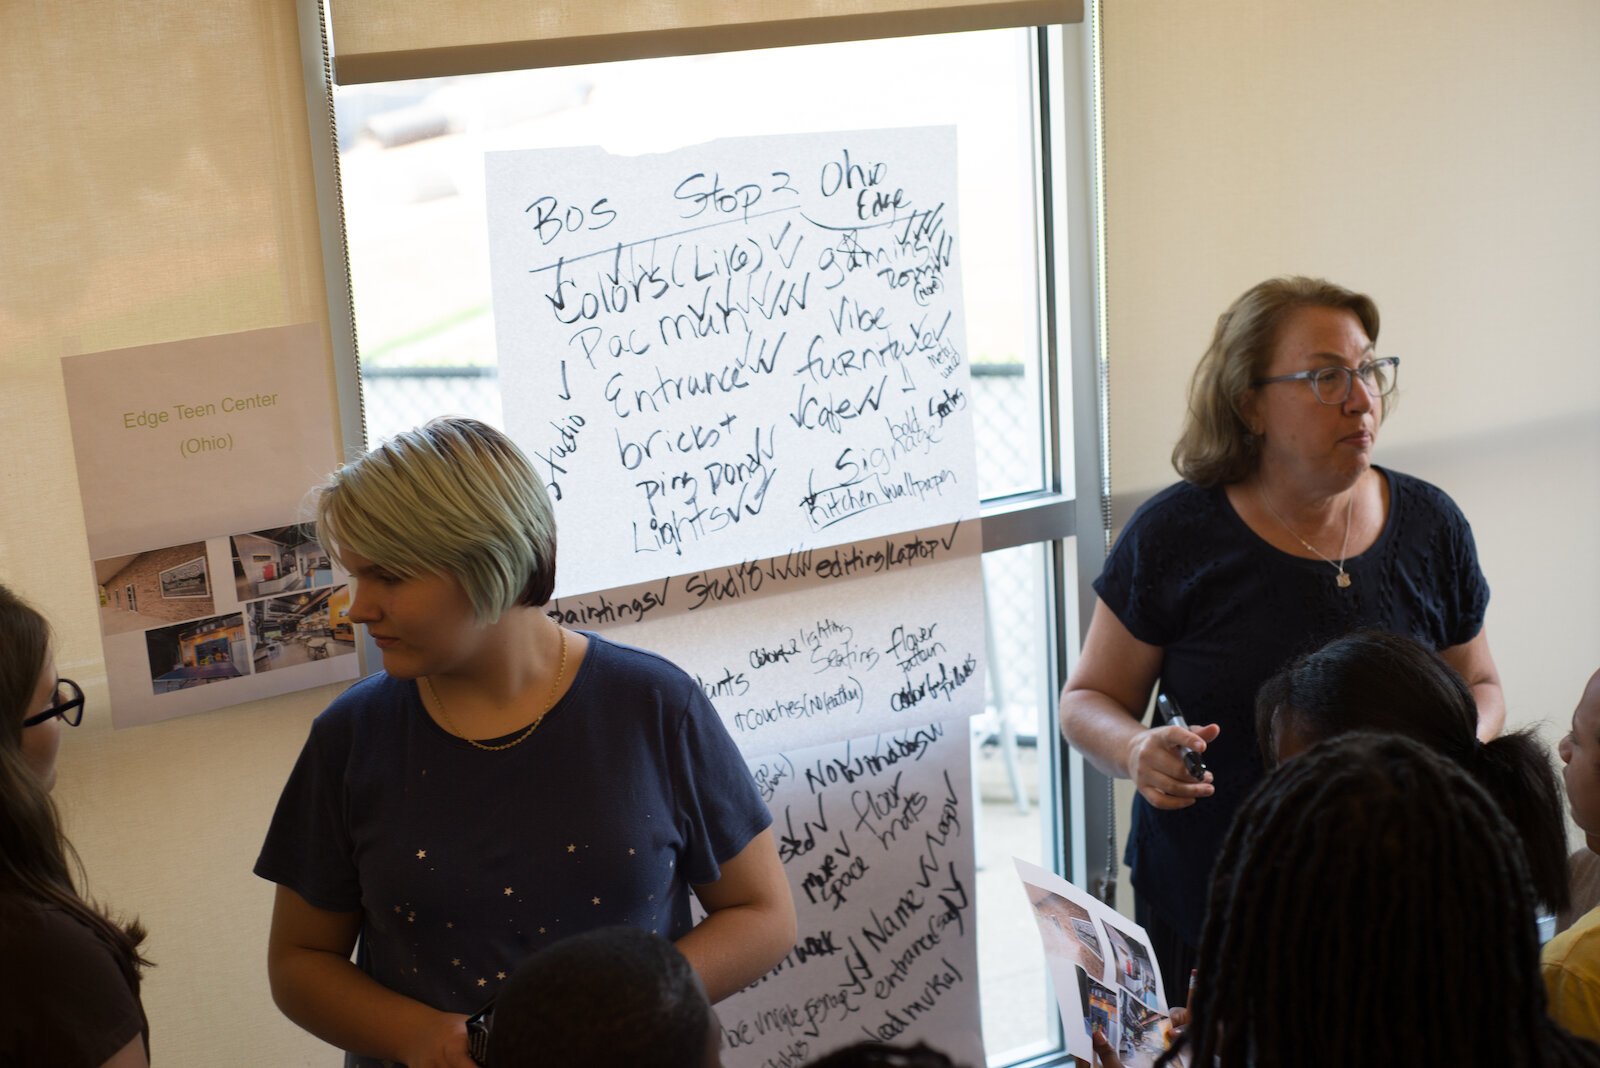 Many ideas were collected when youth came together this summer to offer their input on what a youth and teen facility in their community should look like.